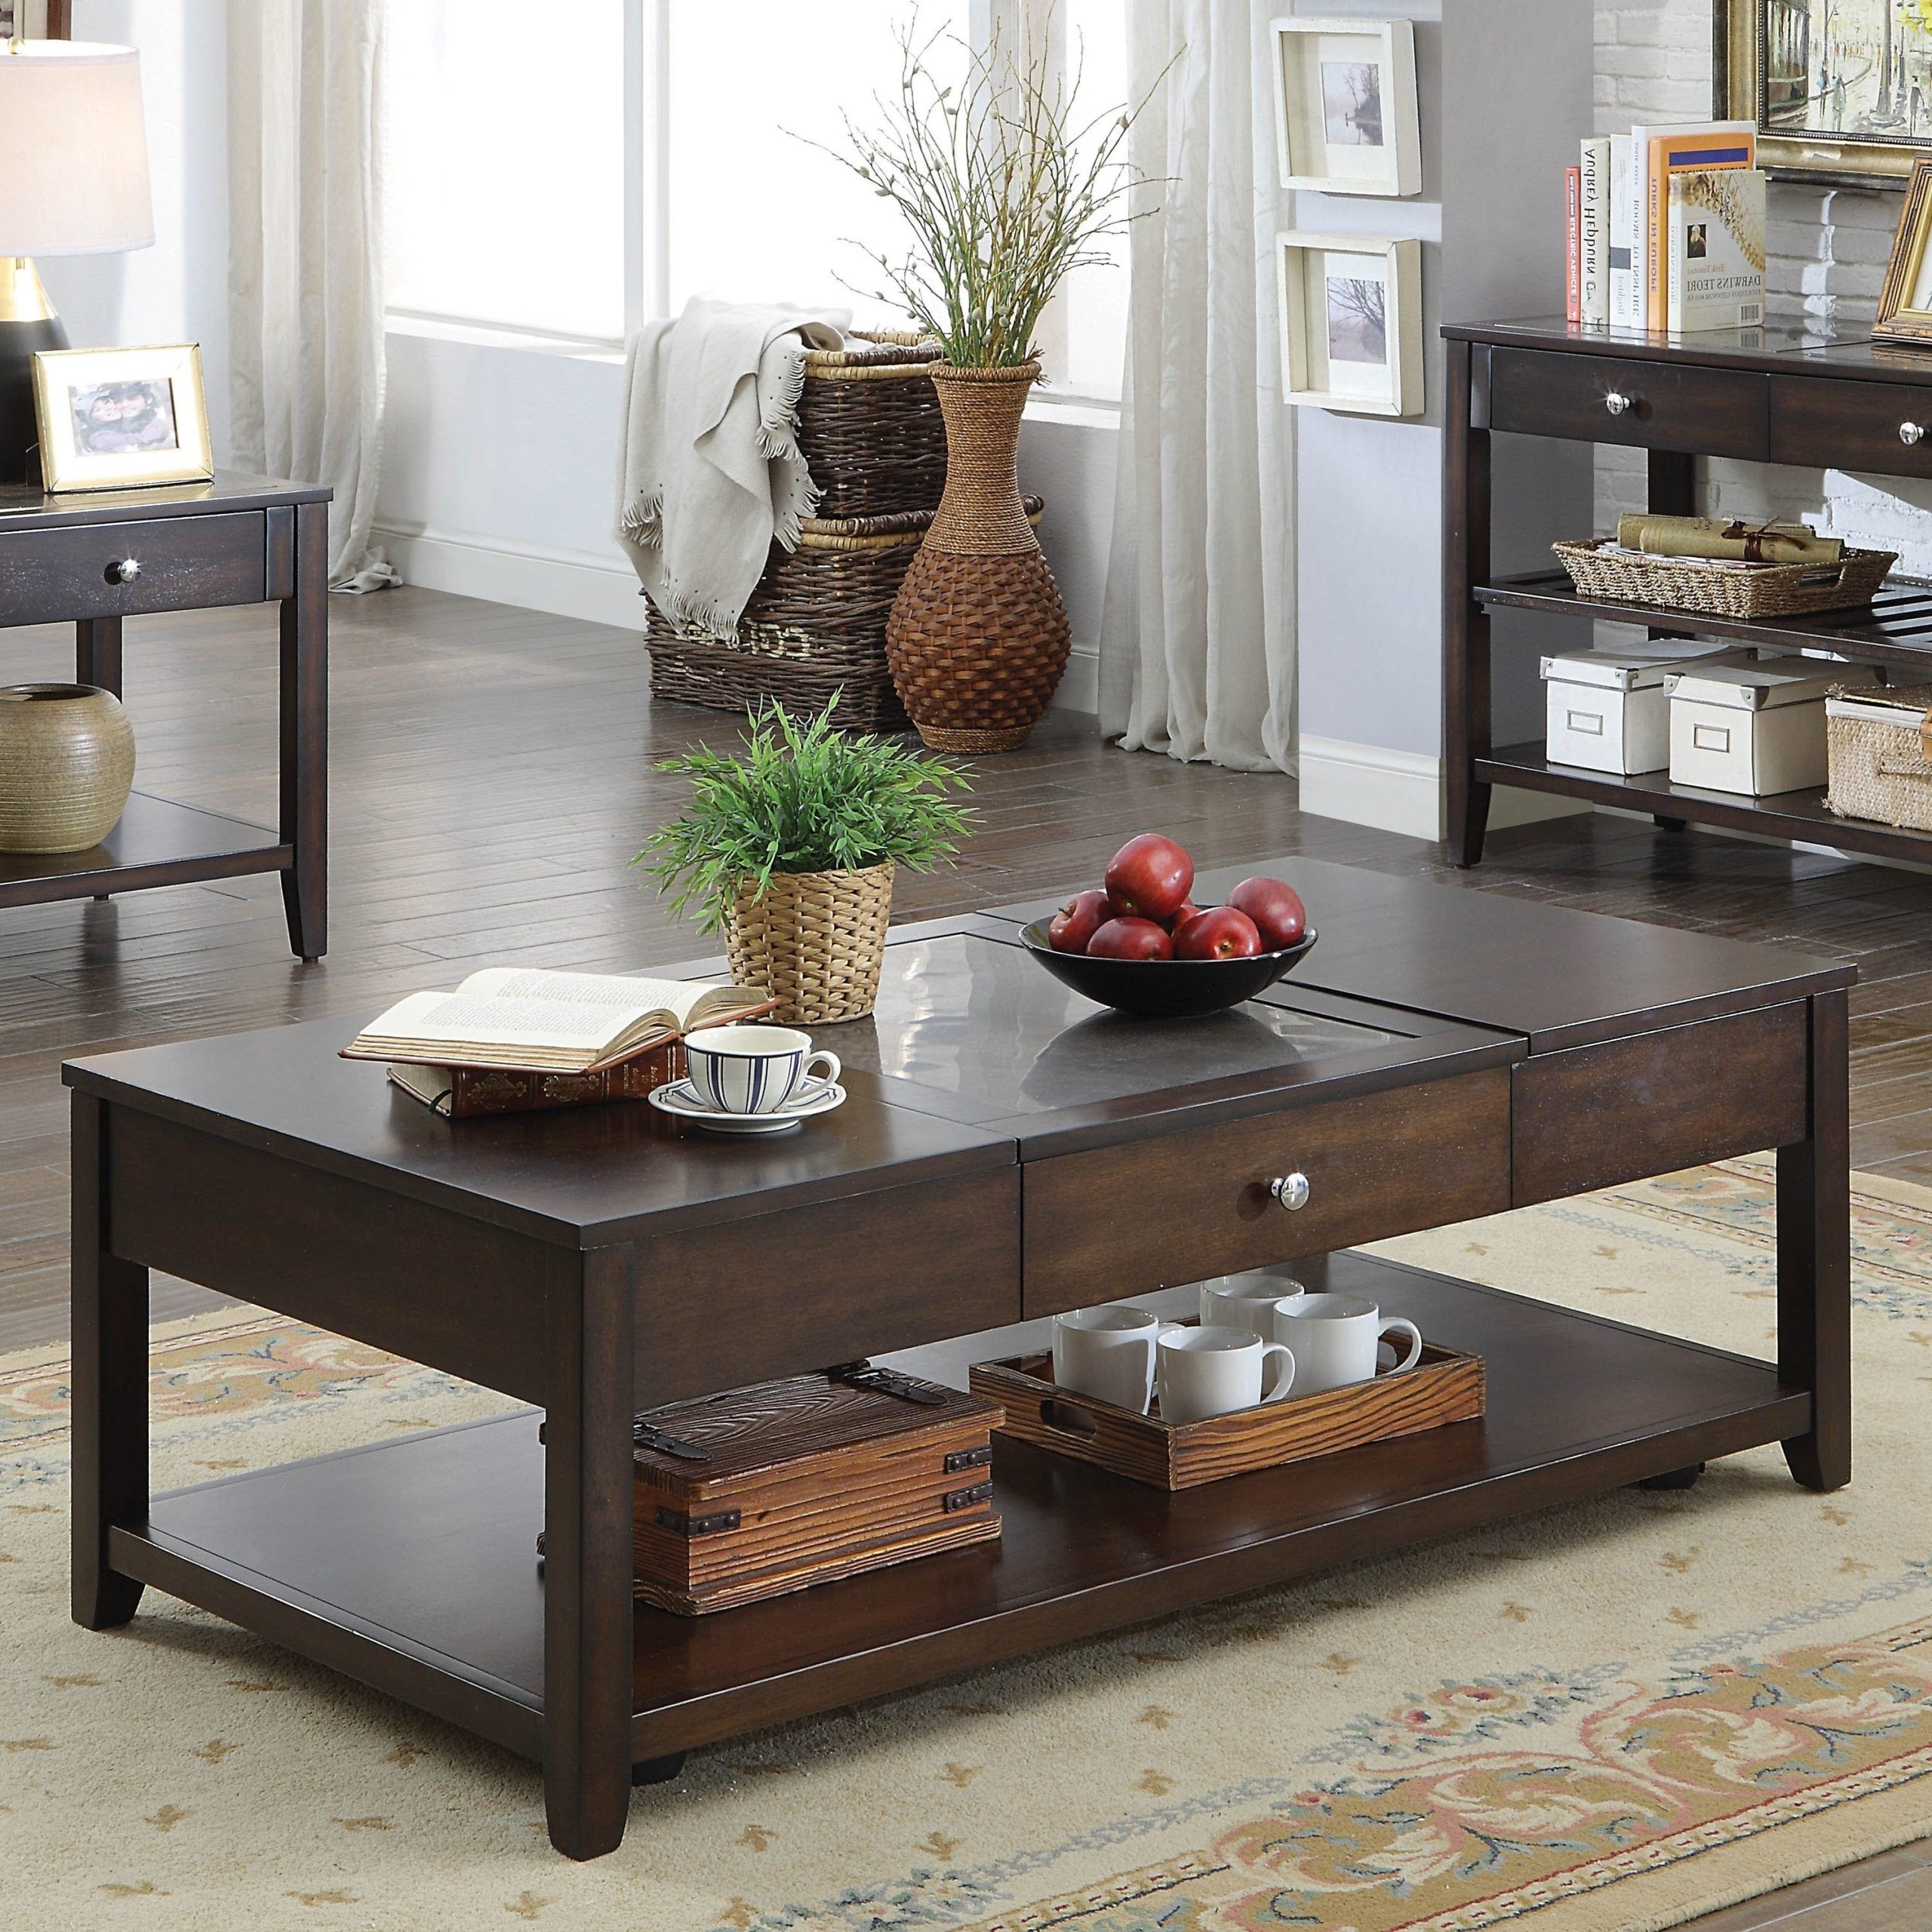 Espresso Wood Finish Coffee Tables For Latest Espresso Coffee Table And End Tables – Includes 1 End Table (View 2 of 15)